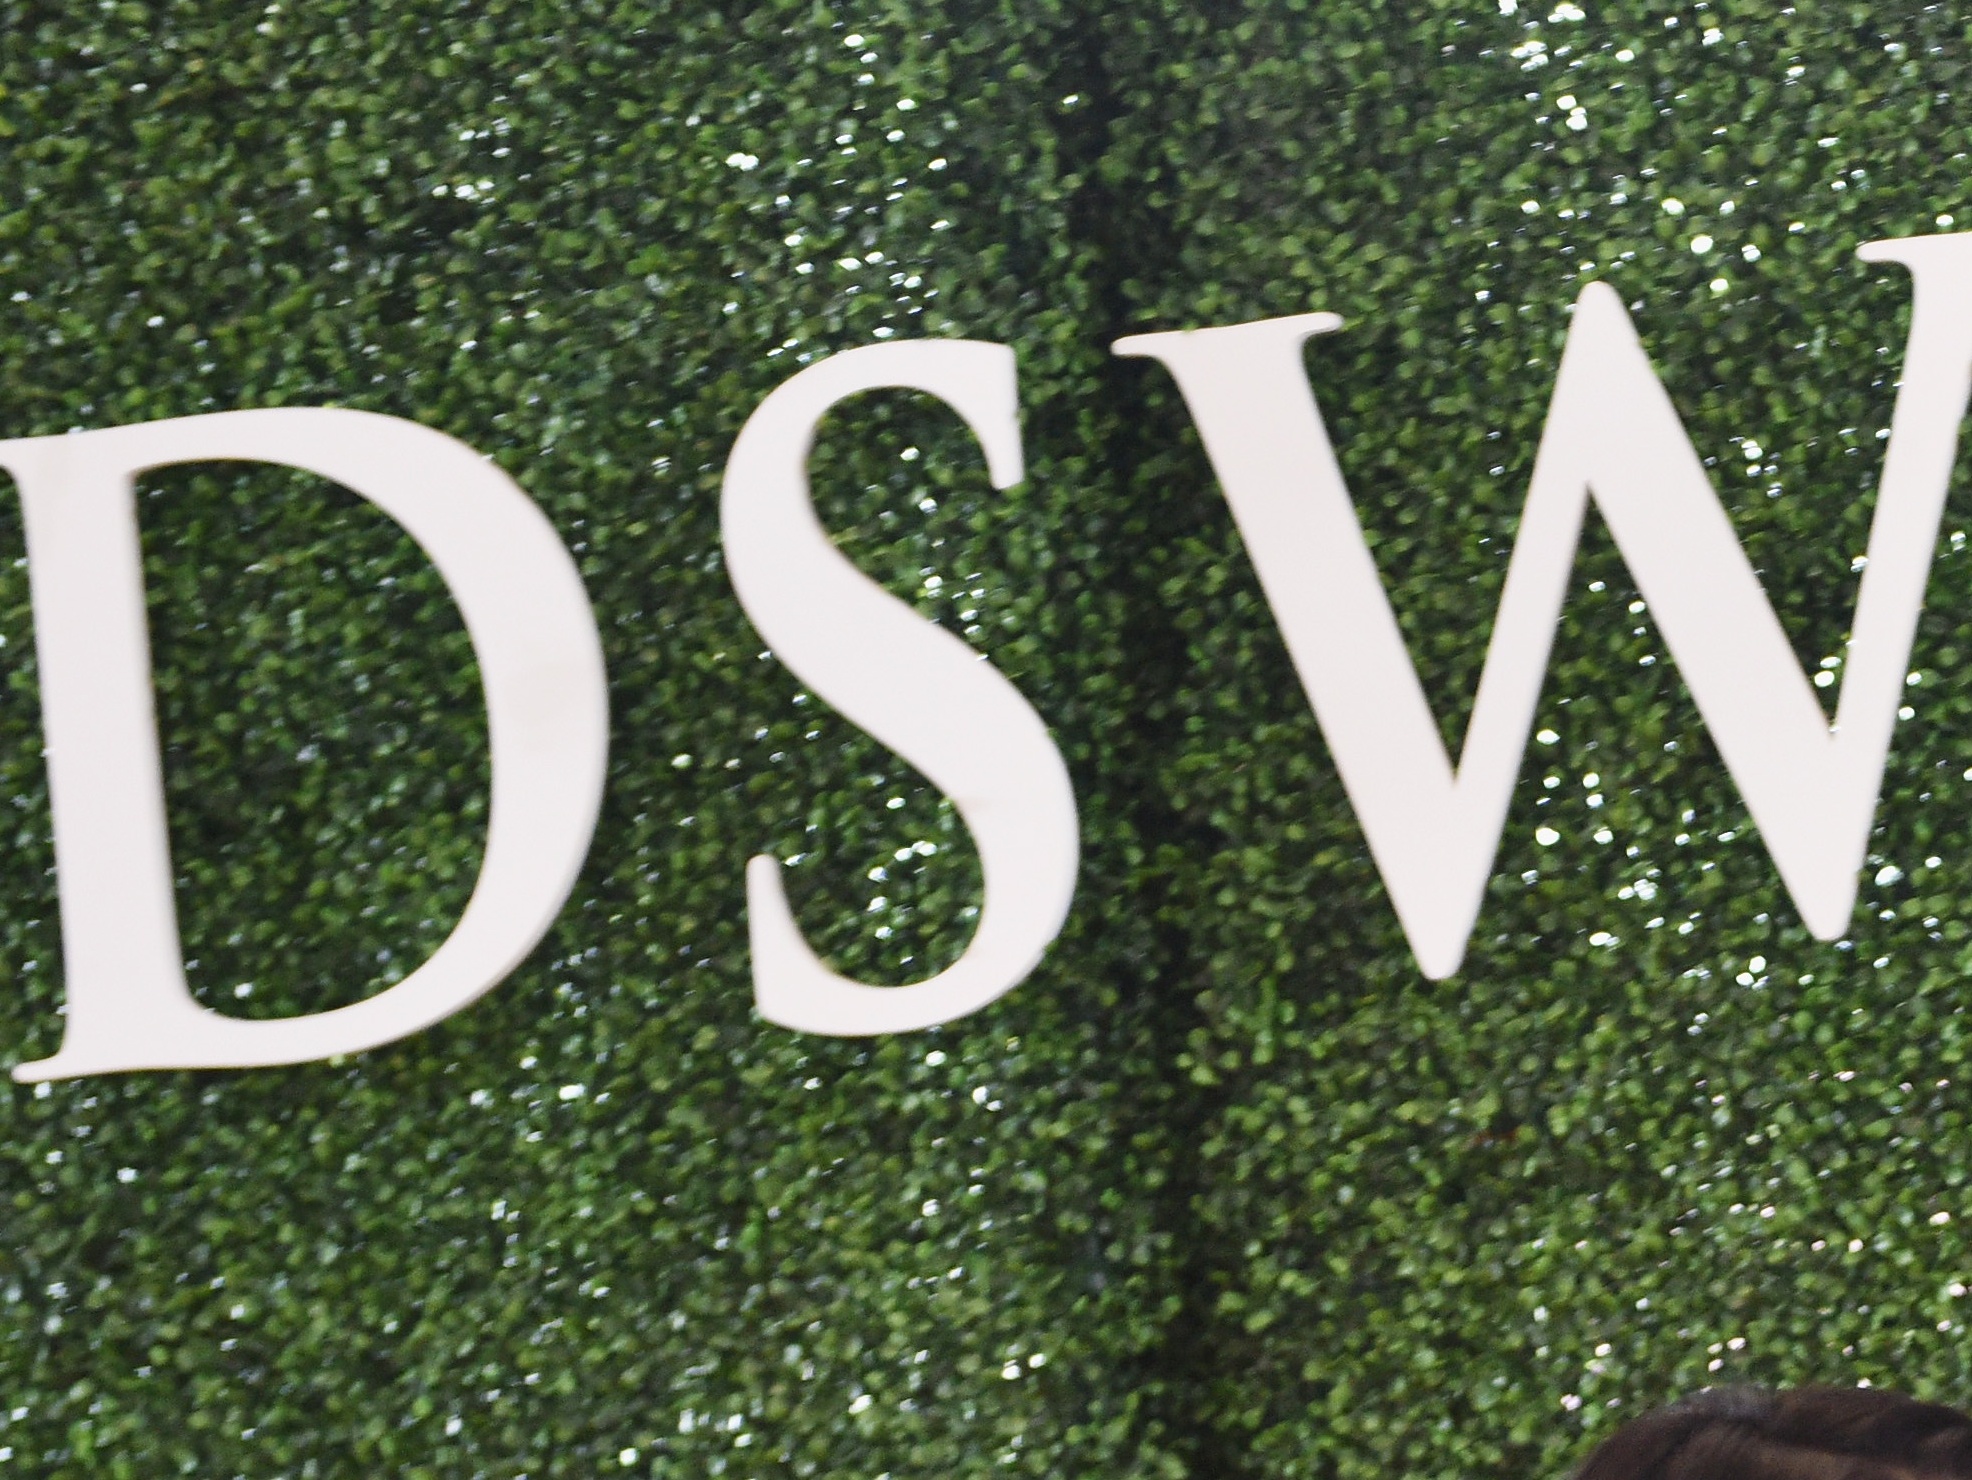 dsw town shoes